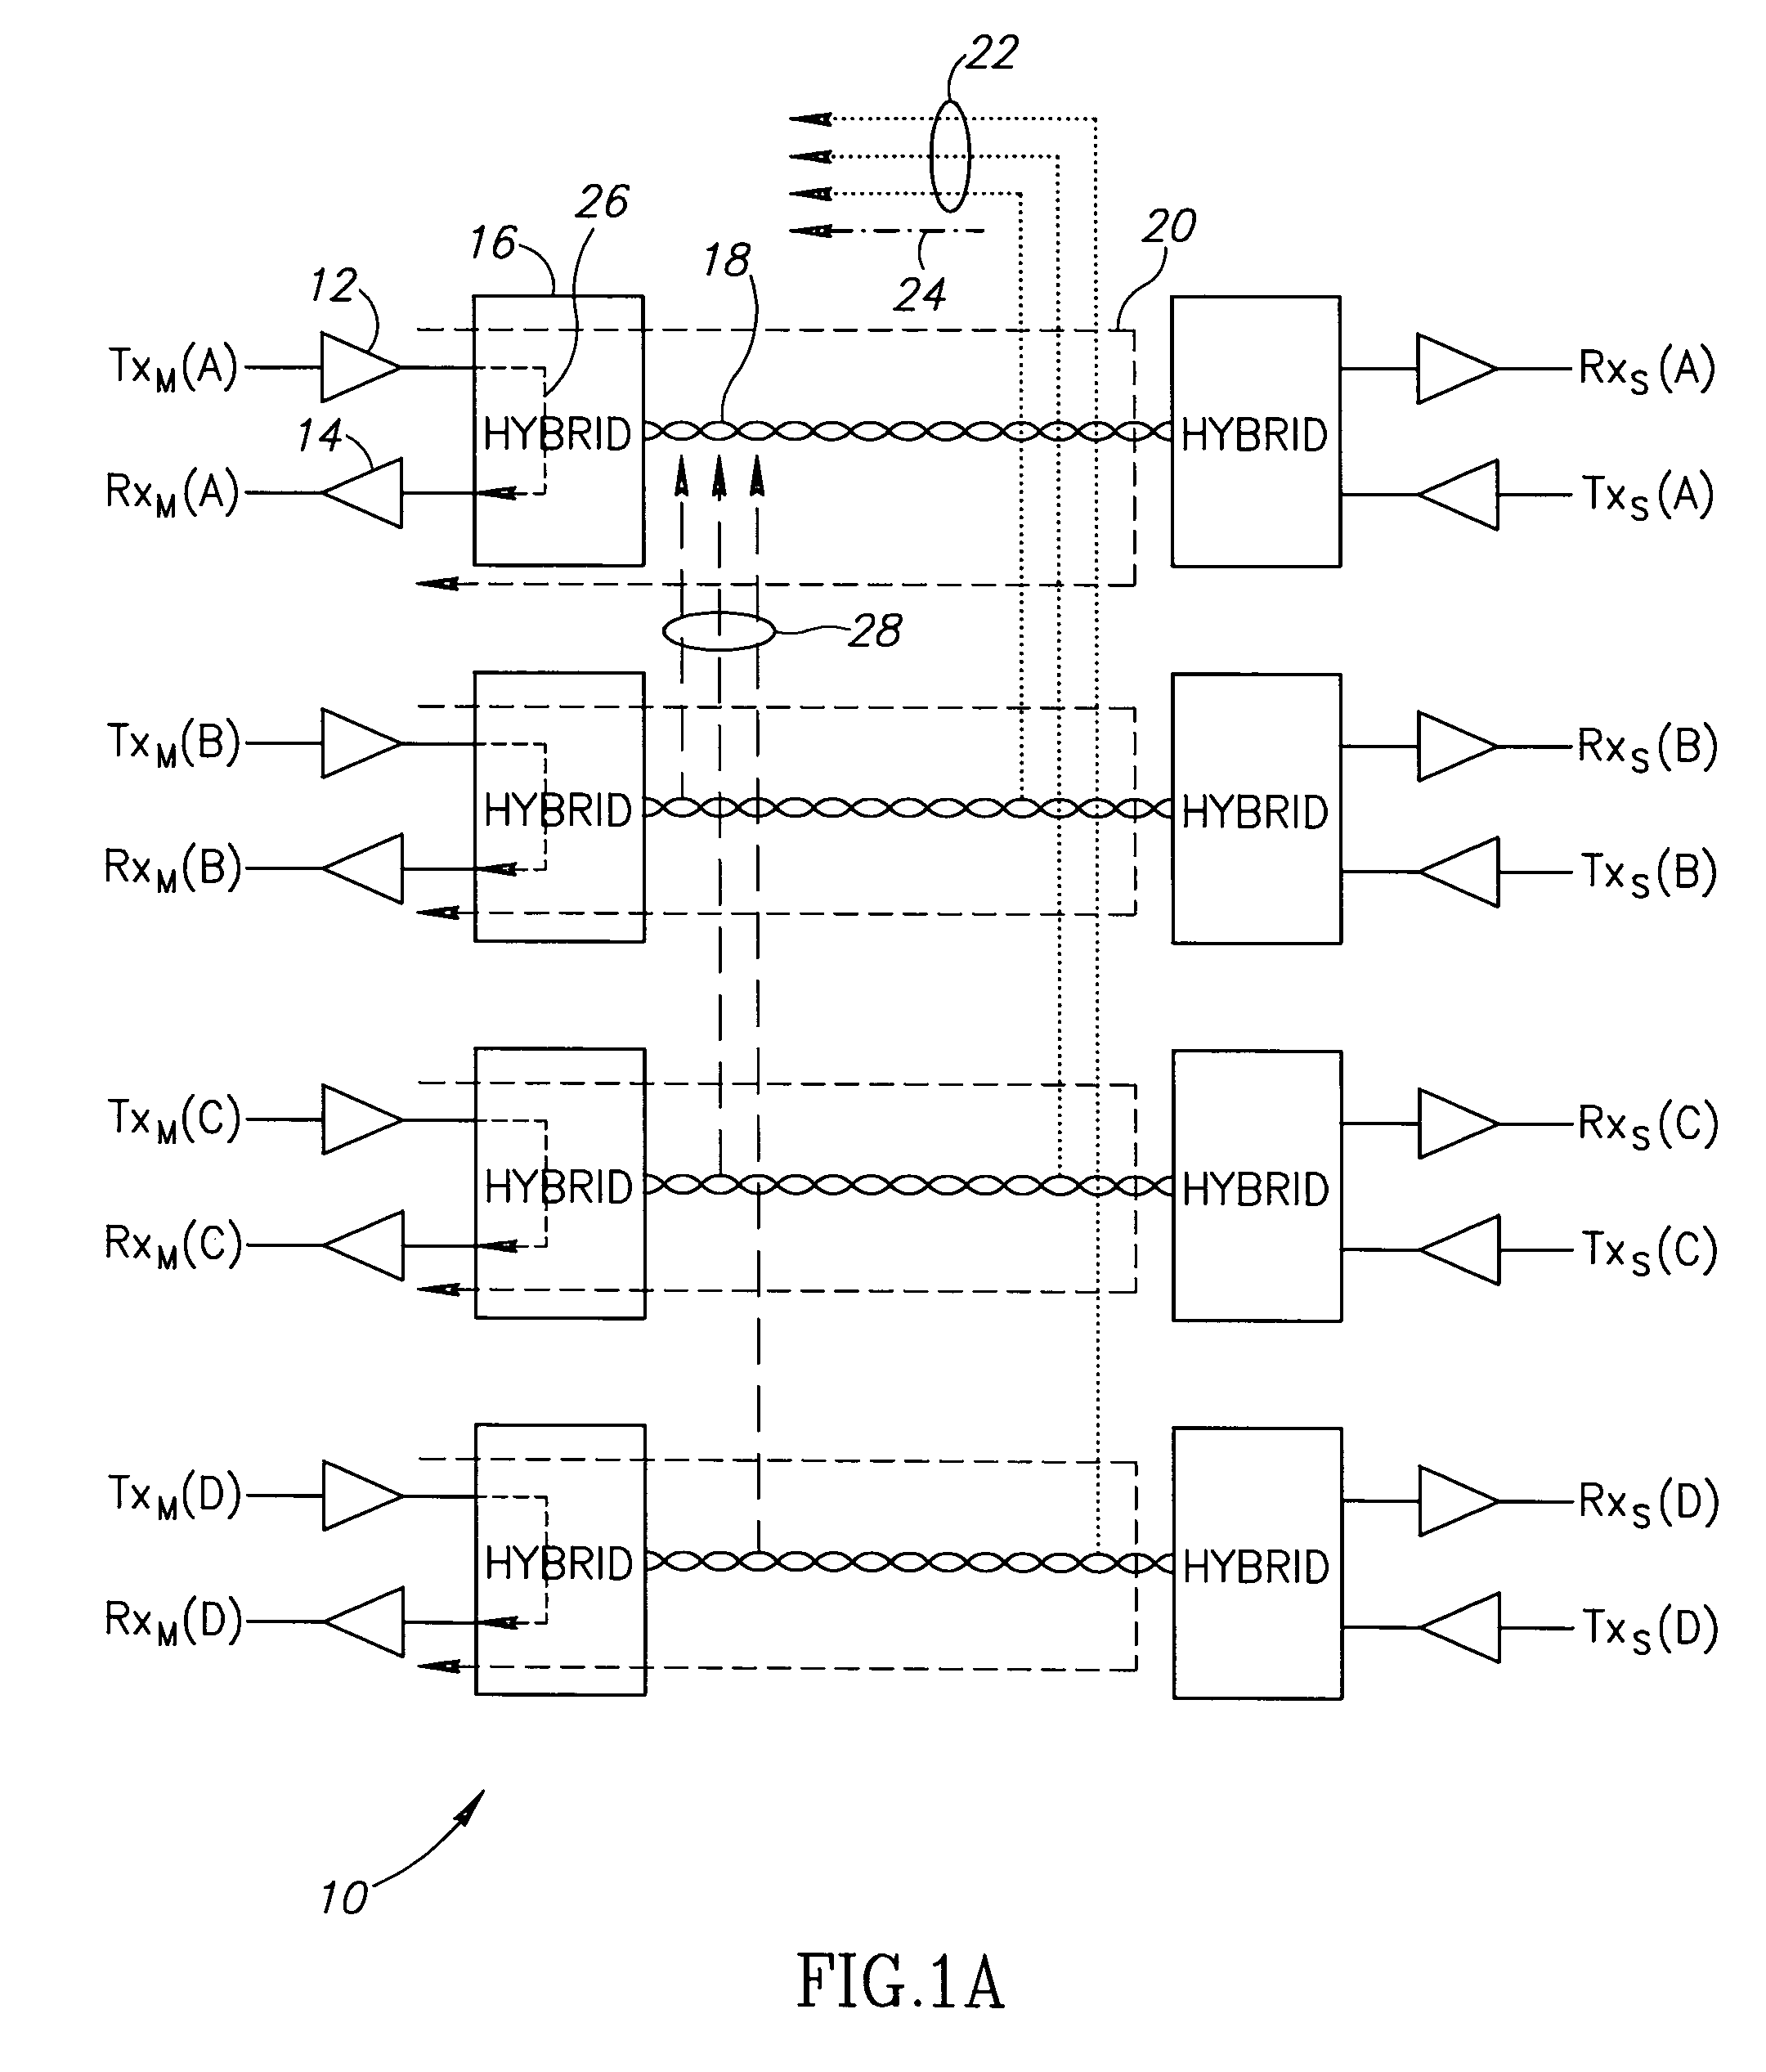 Interference canceller tap sharing in a communications transceiver